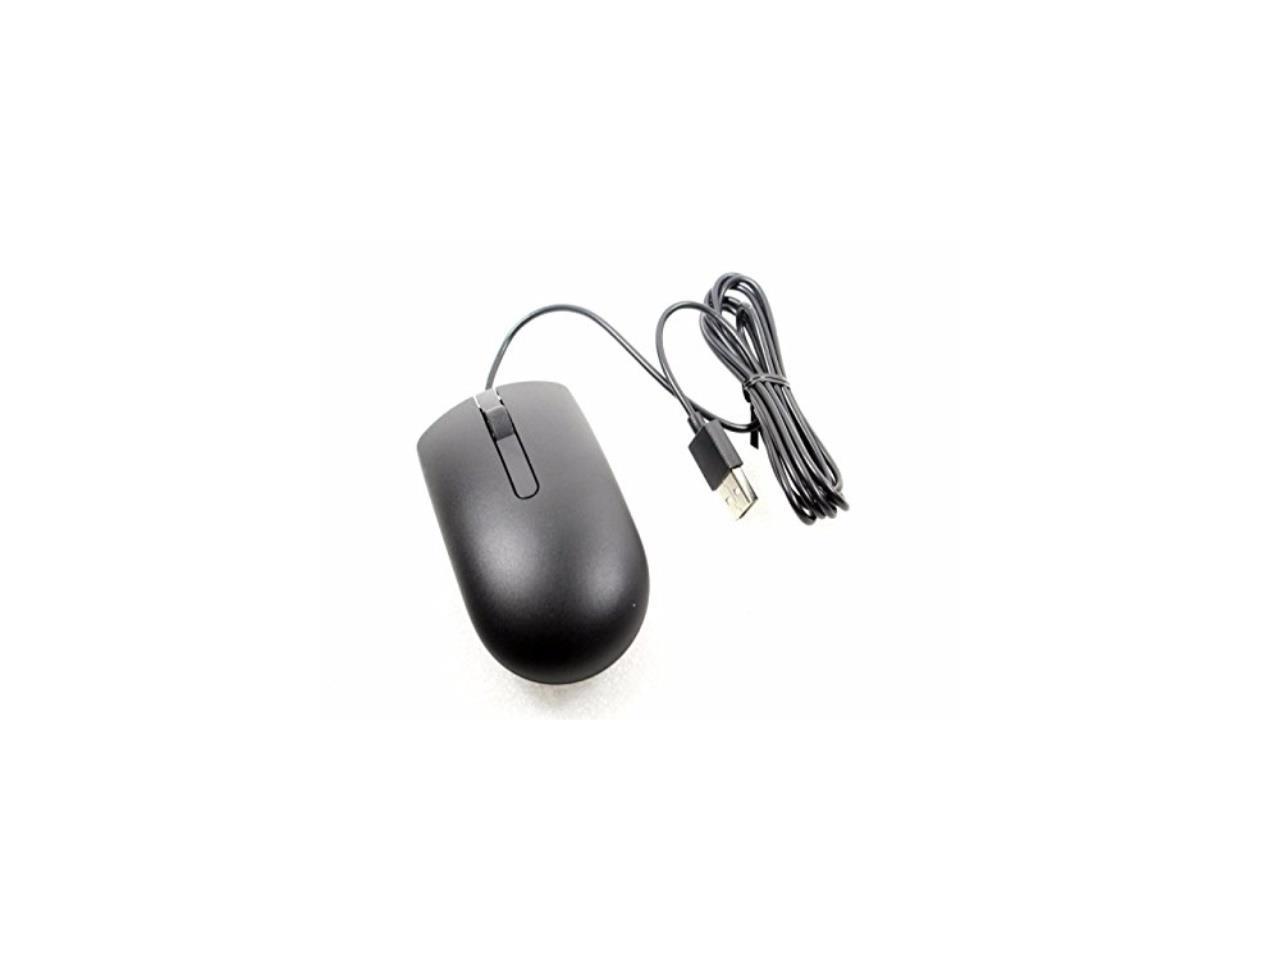 usb optical mouse driver not found